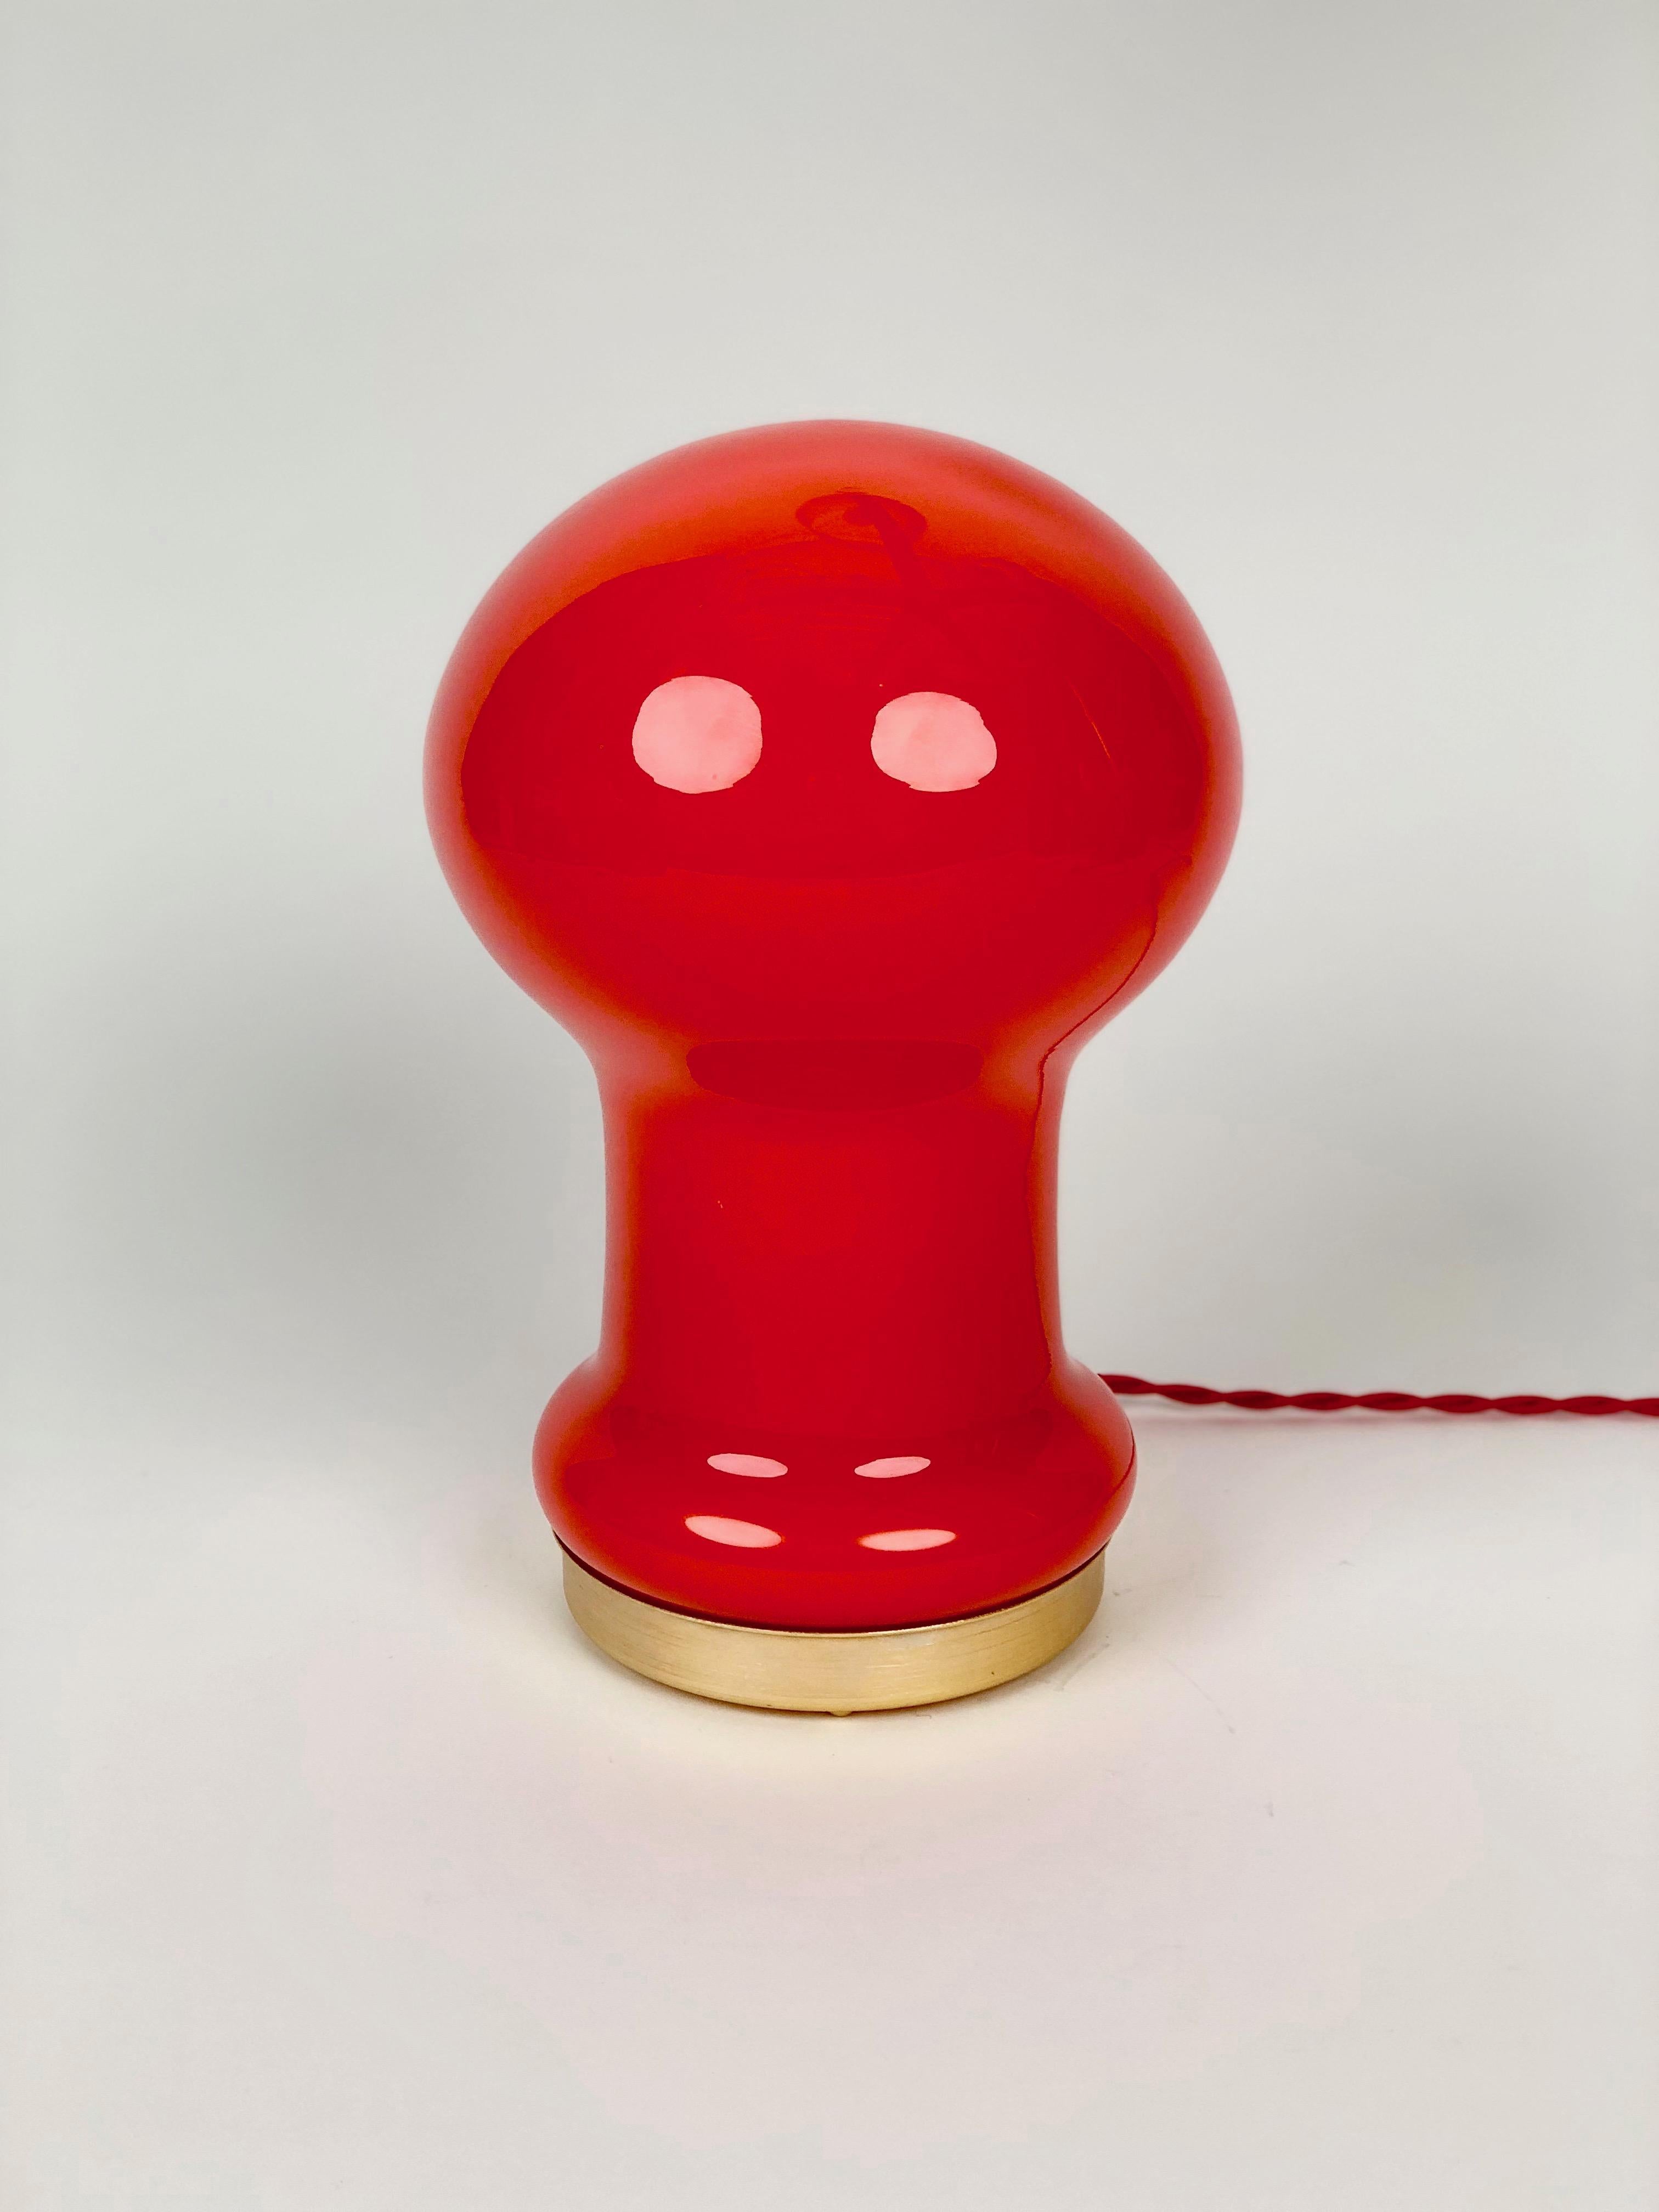 Czech Mid-Century Table Lamp in Red Orange Opaline Glass, Designed by Stepan Tabery  For Sale